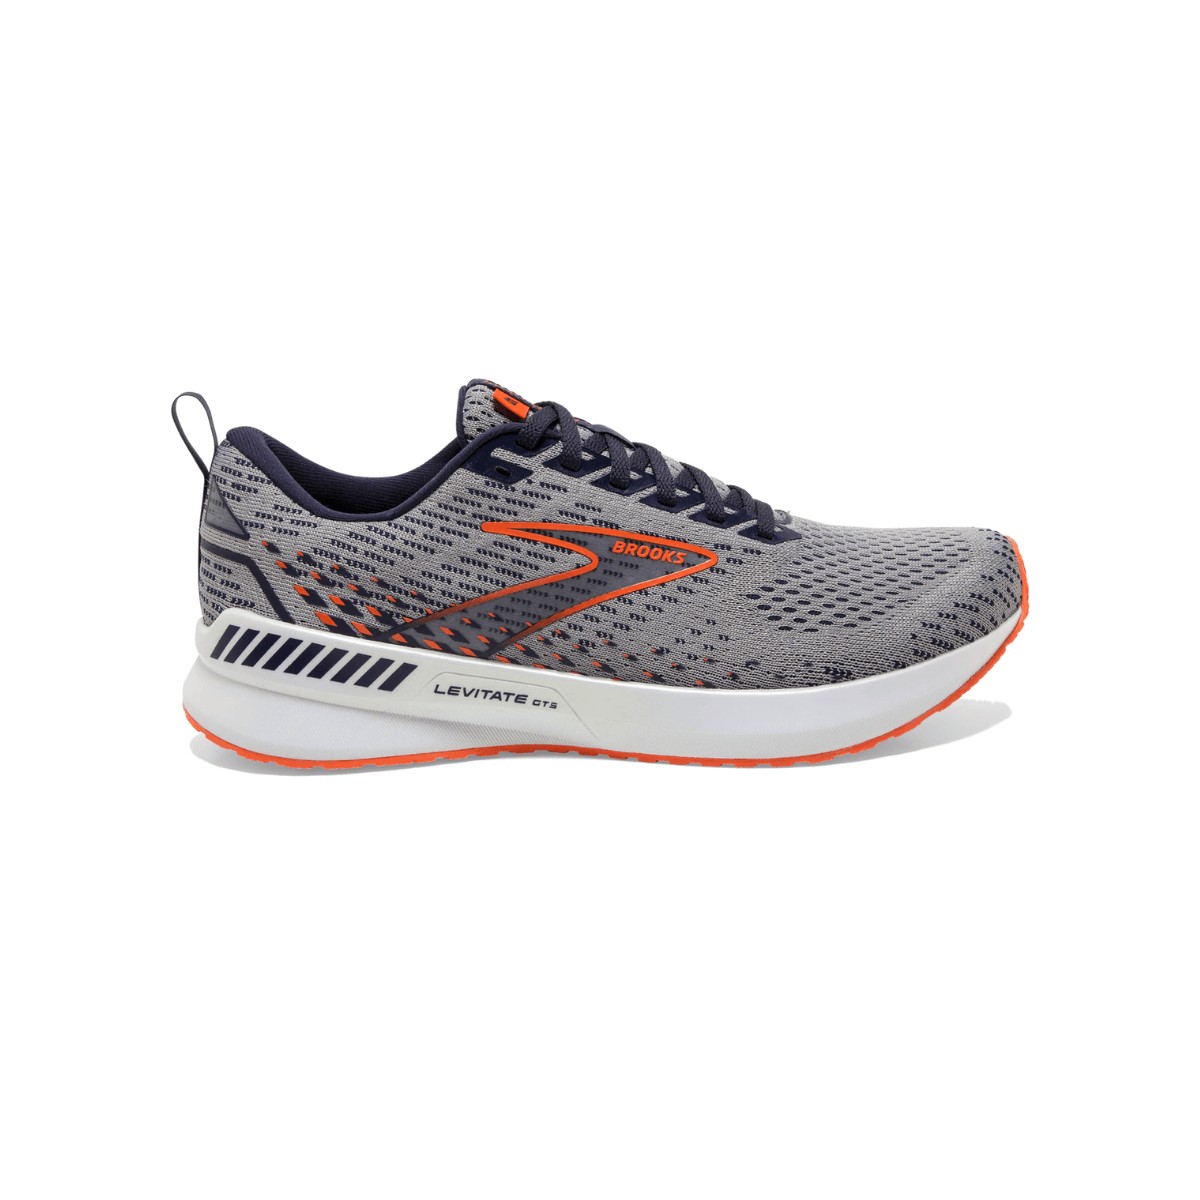 Chaussures Brooks Levitate GTS 5 Gris Orange SS22, Taille 42,5 - EUR